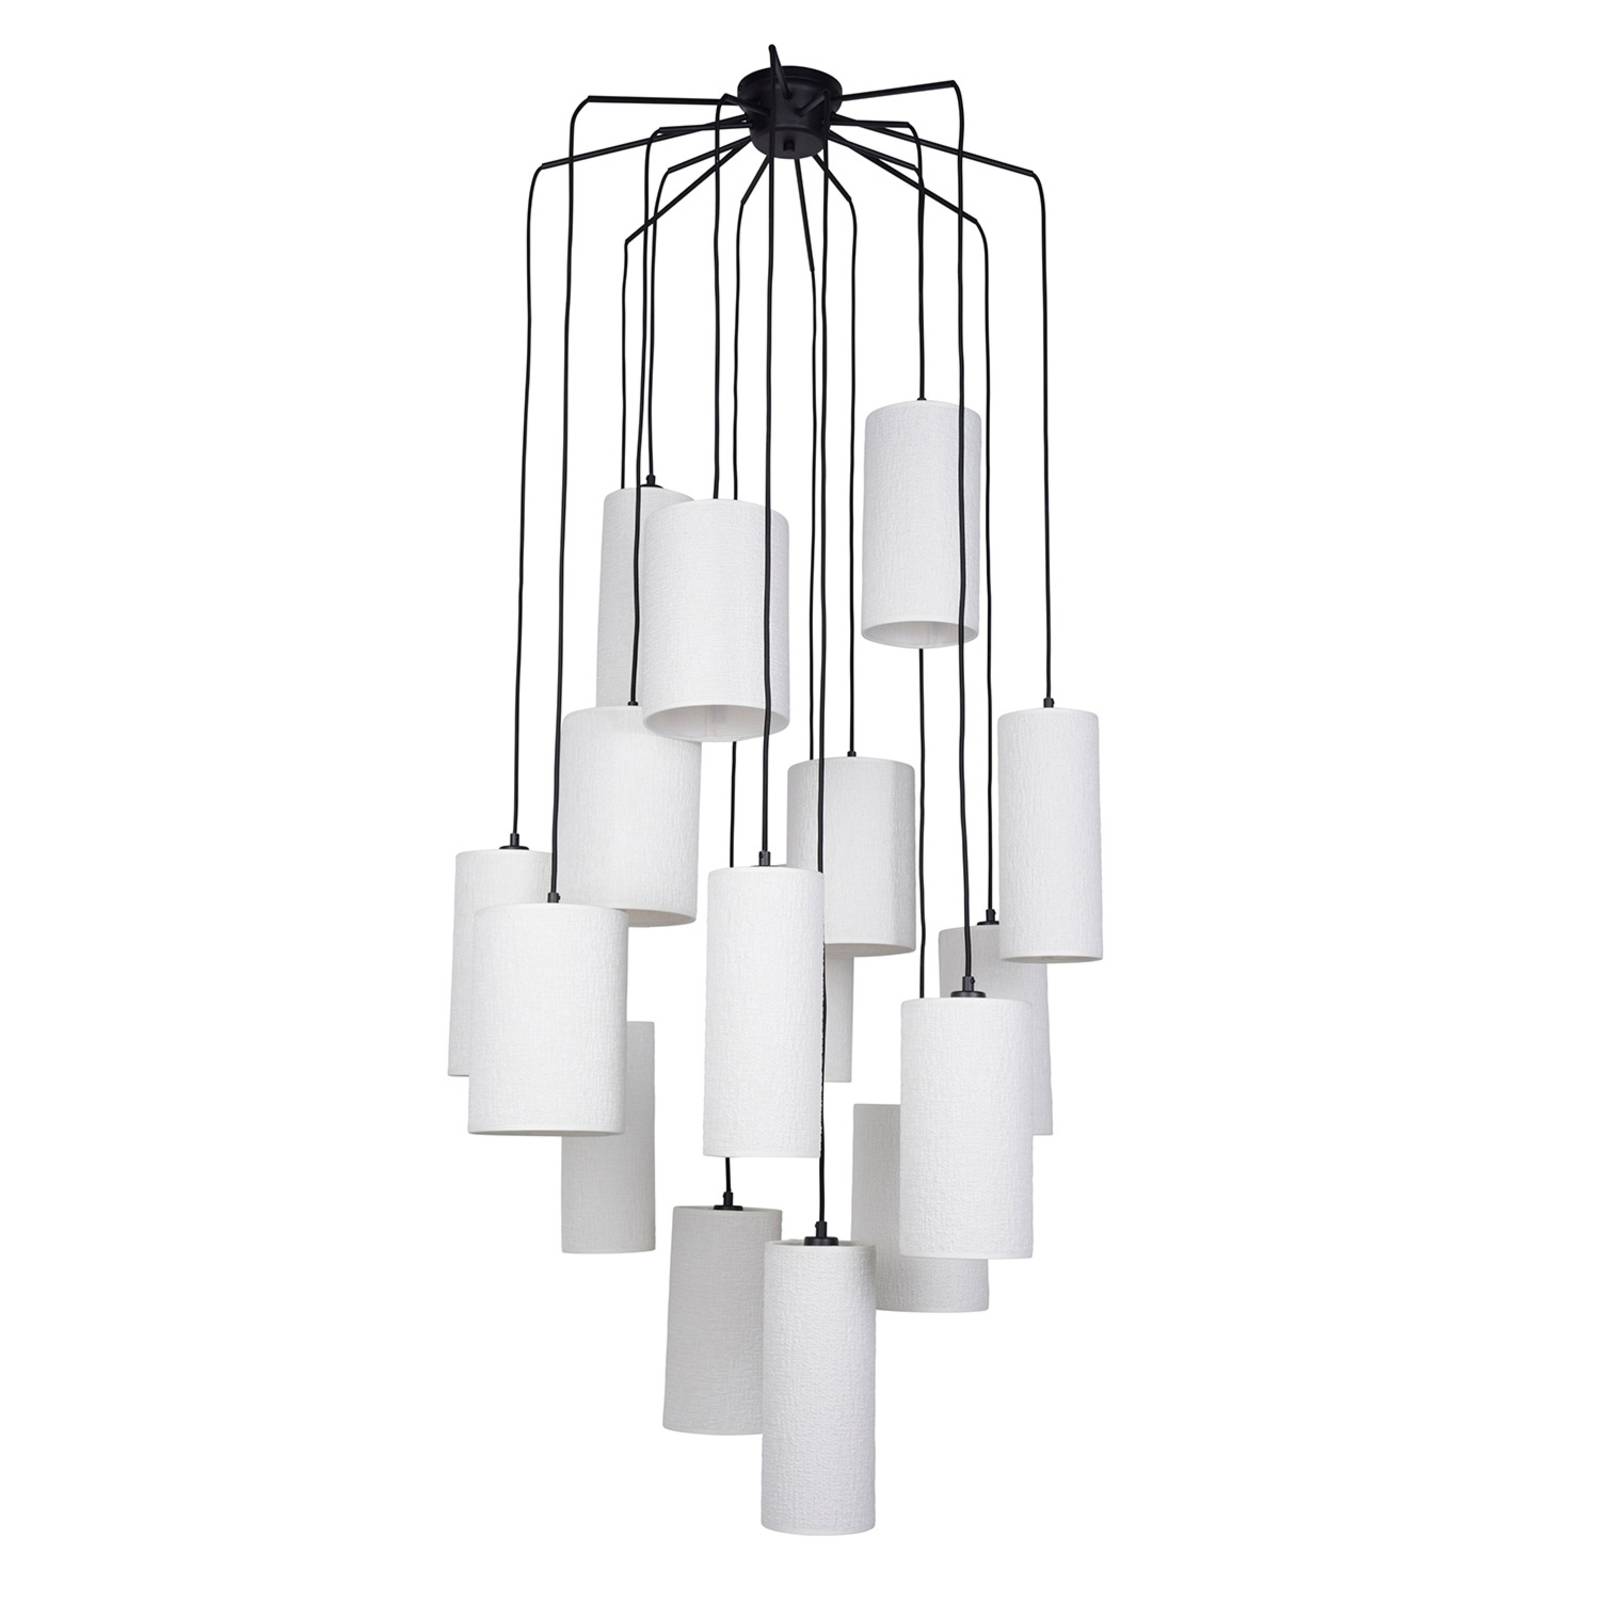 Image of MARKET SET Cosiness suspension 16 lampes, ronde 3188000774699